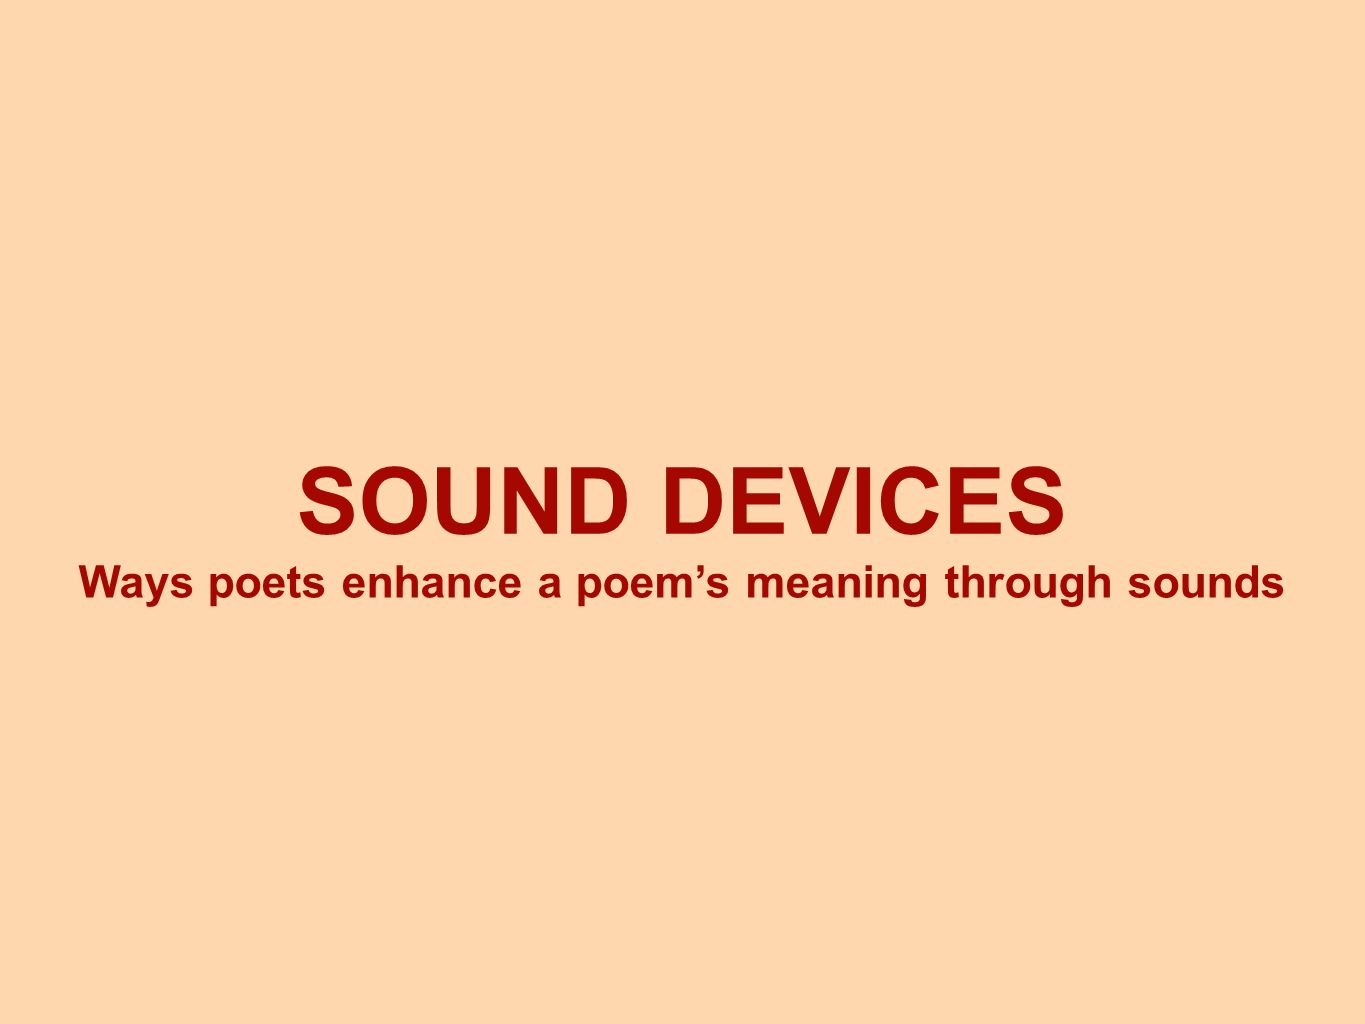 SOUND DEVICES Ways poets enhance a poem’s meaning through sounds